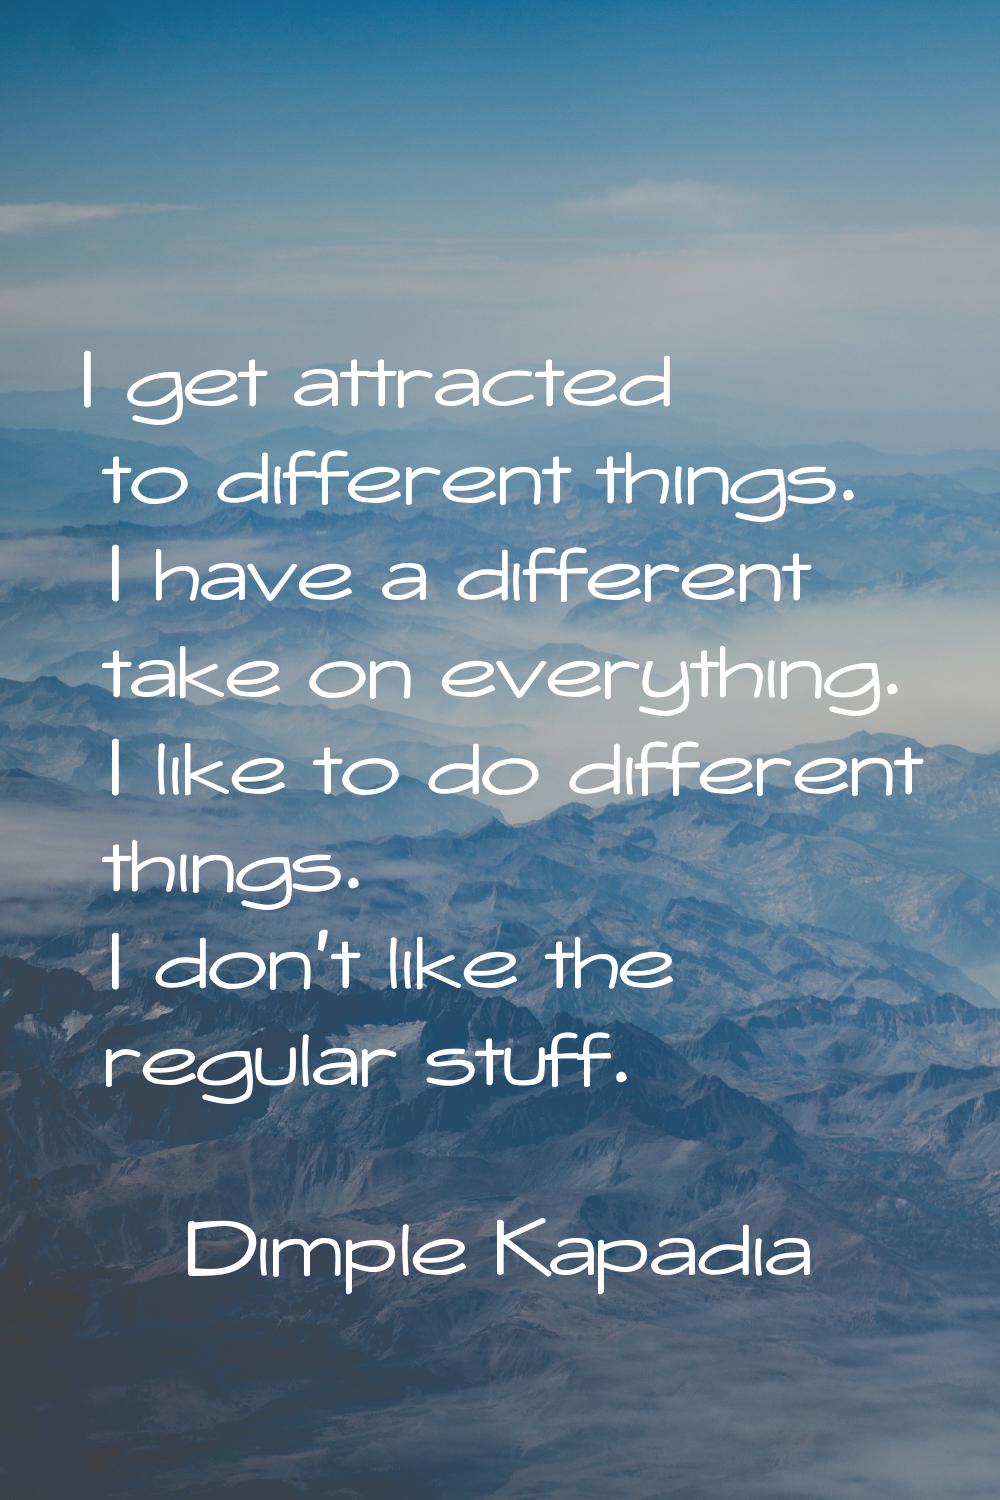 I get attracted to different things. I have a different take on everything. I like to do different 